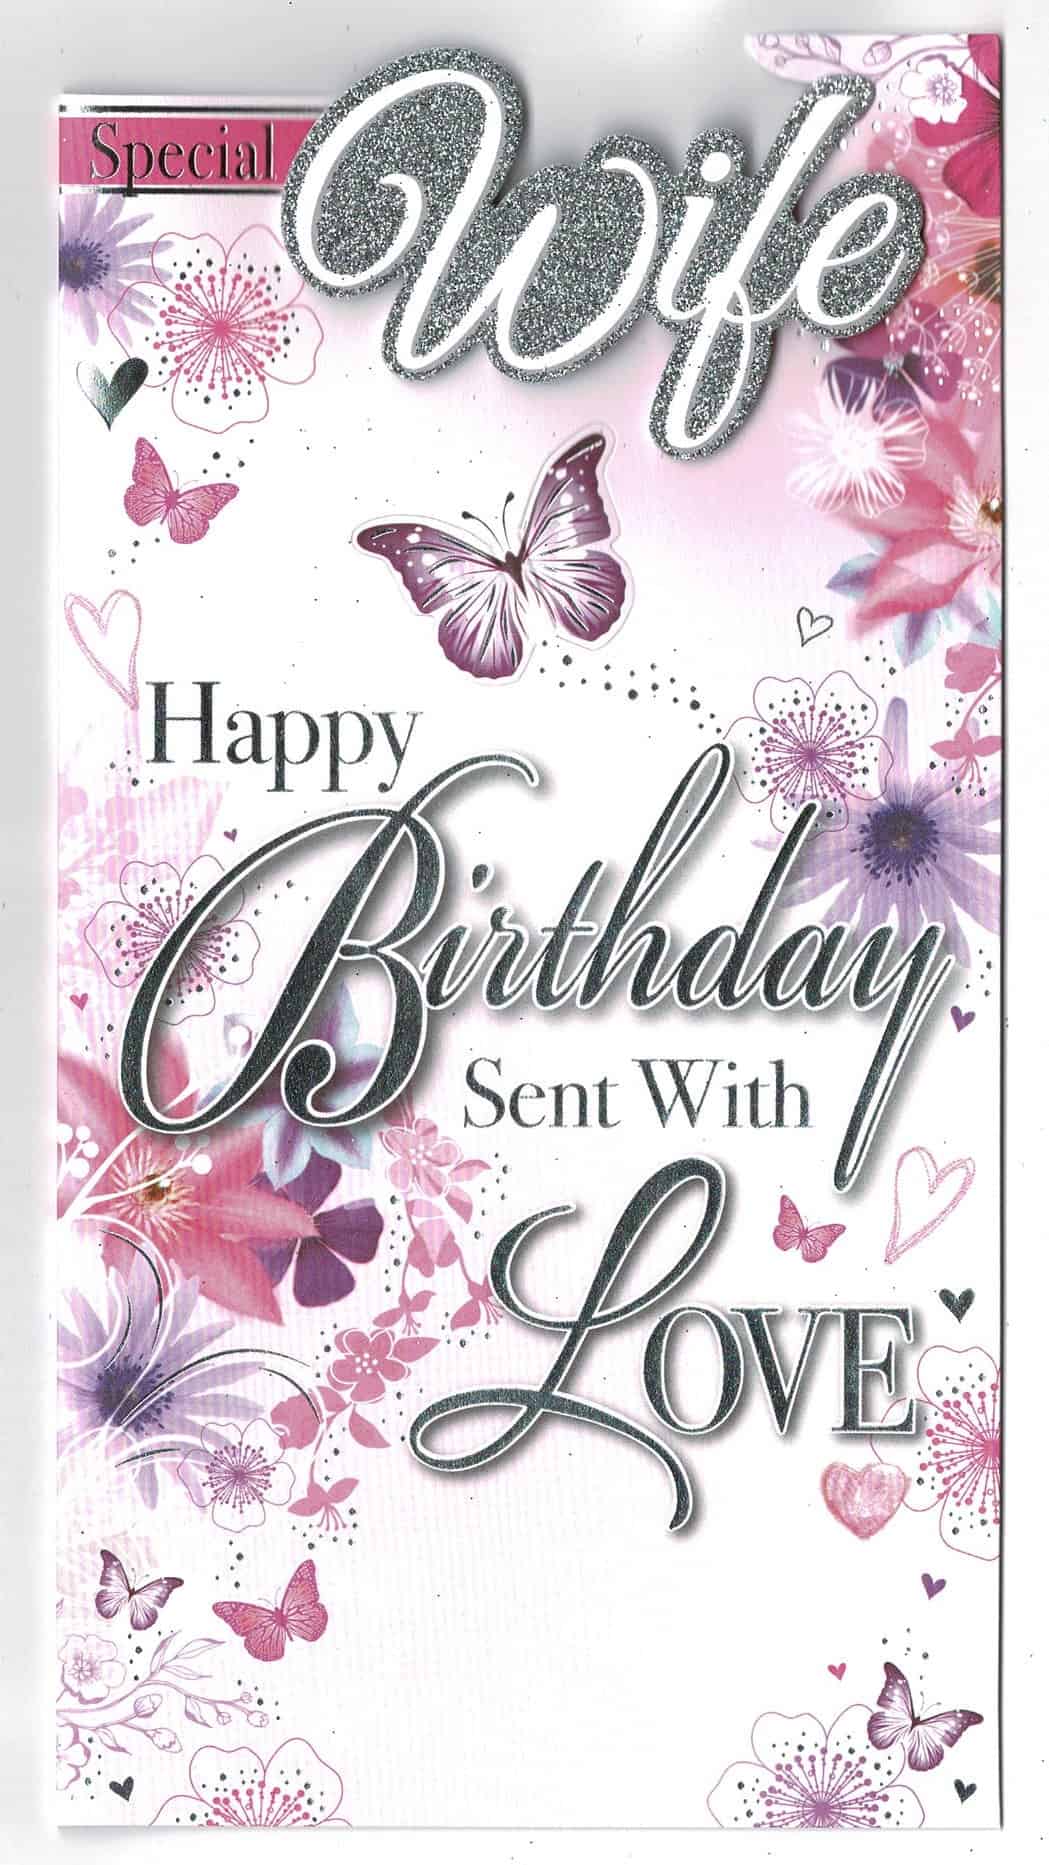 Wife Birthday Card 'Special Wife Happy Birthday' With Love Gifts & Cards